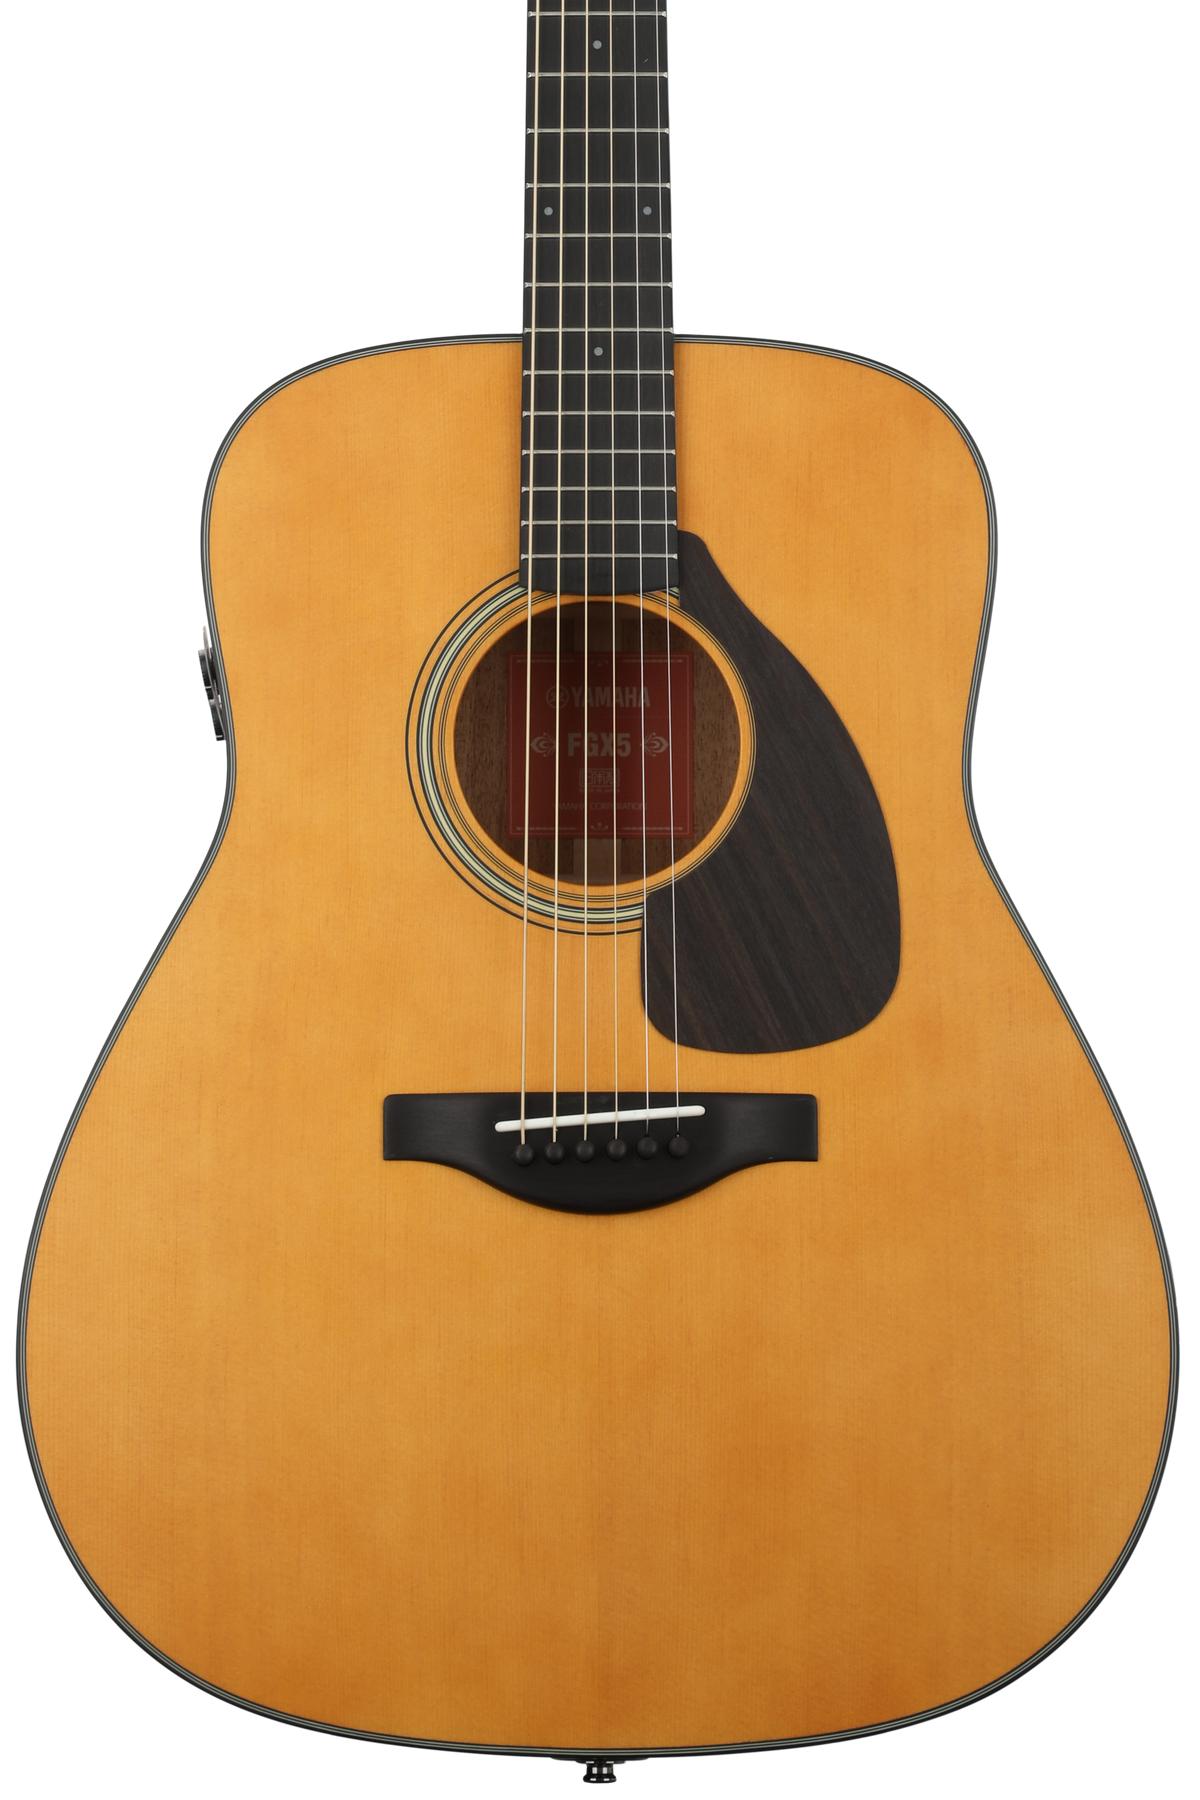 Yamaha Red Label FGX5 - Natural